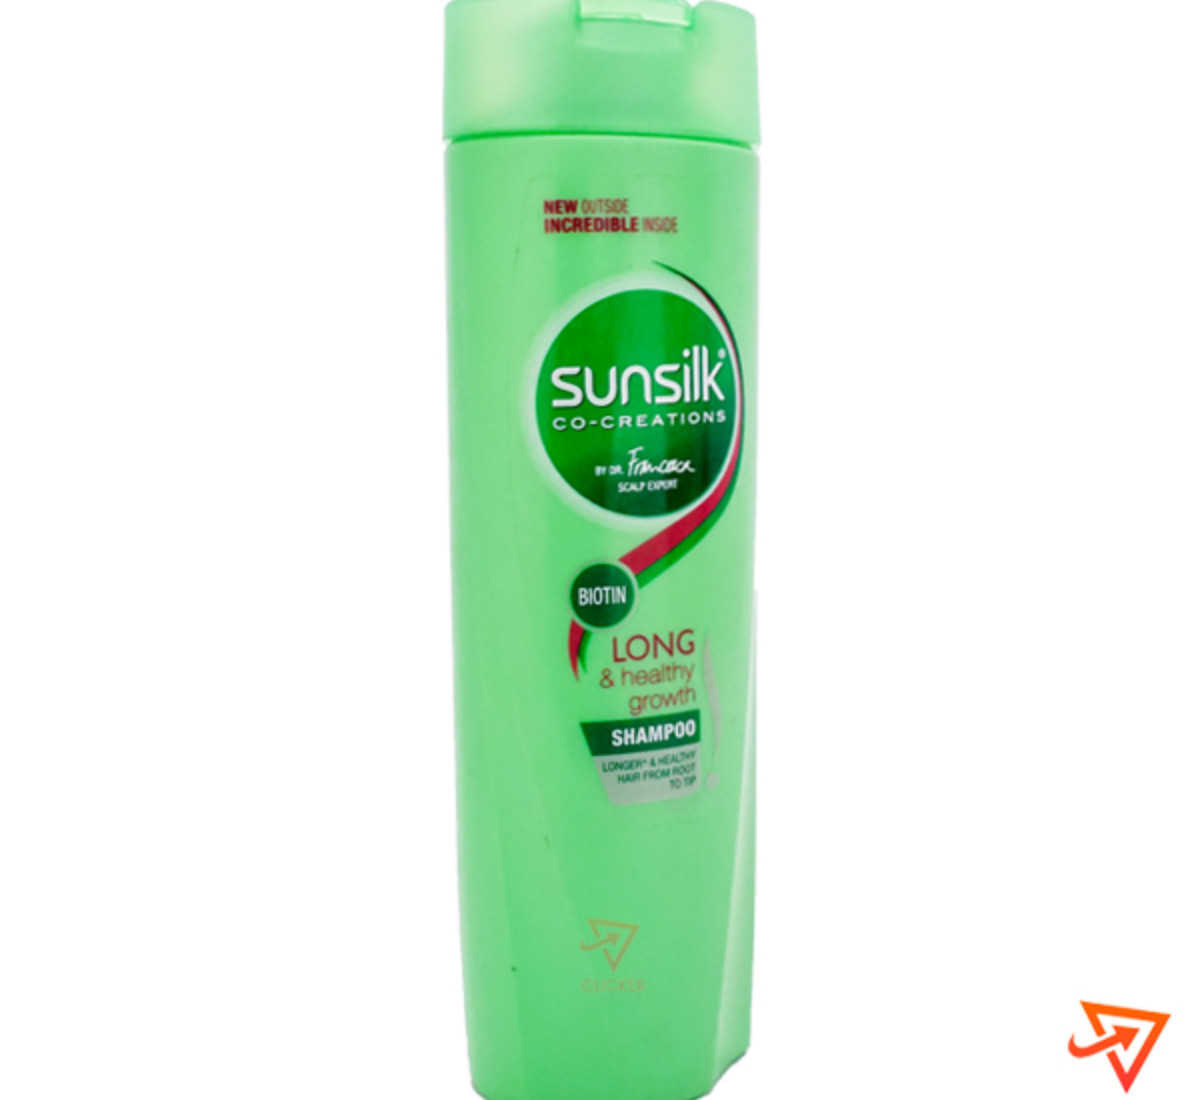 Clicker product 80ml SUNSILK long and healthy growth shampoo 1113